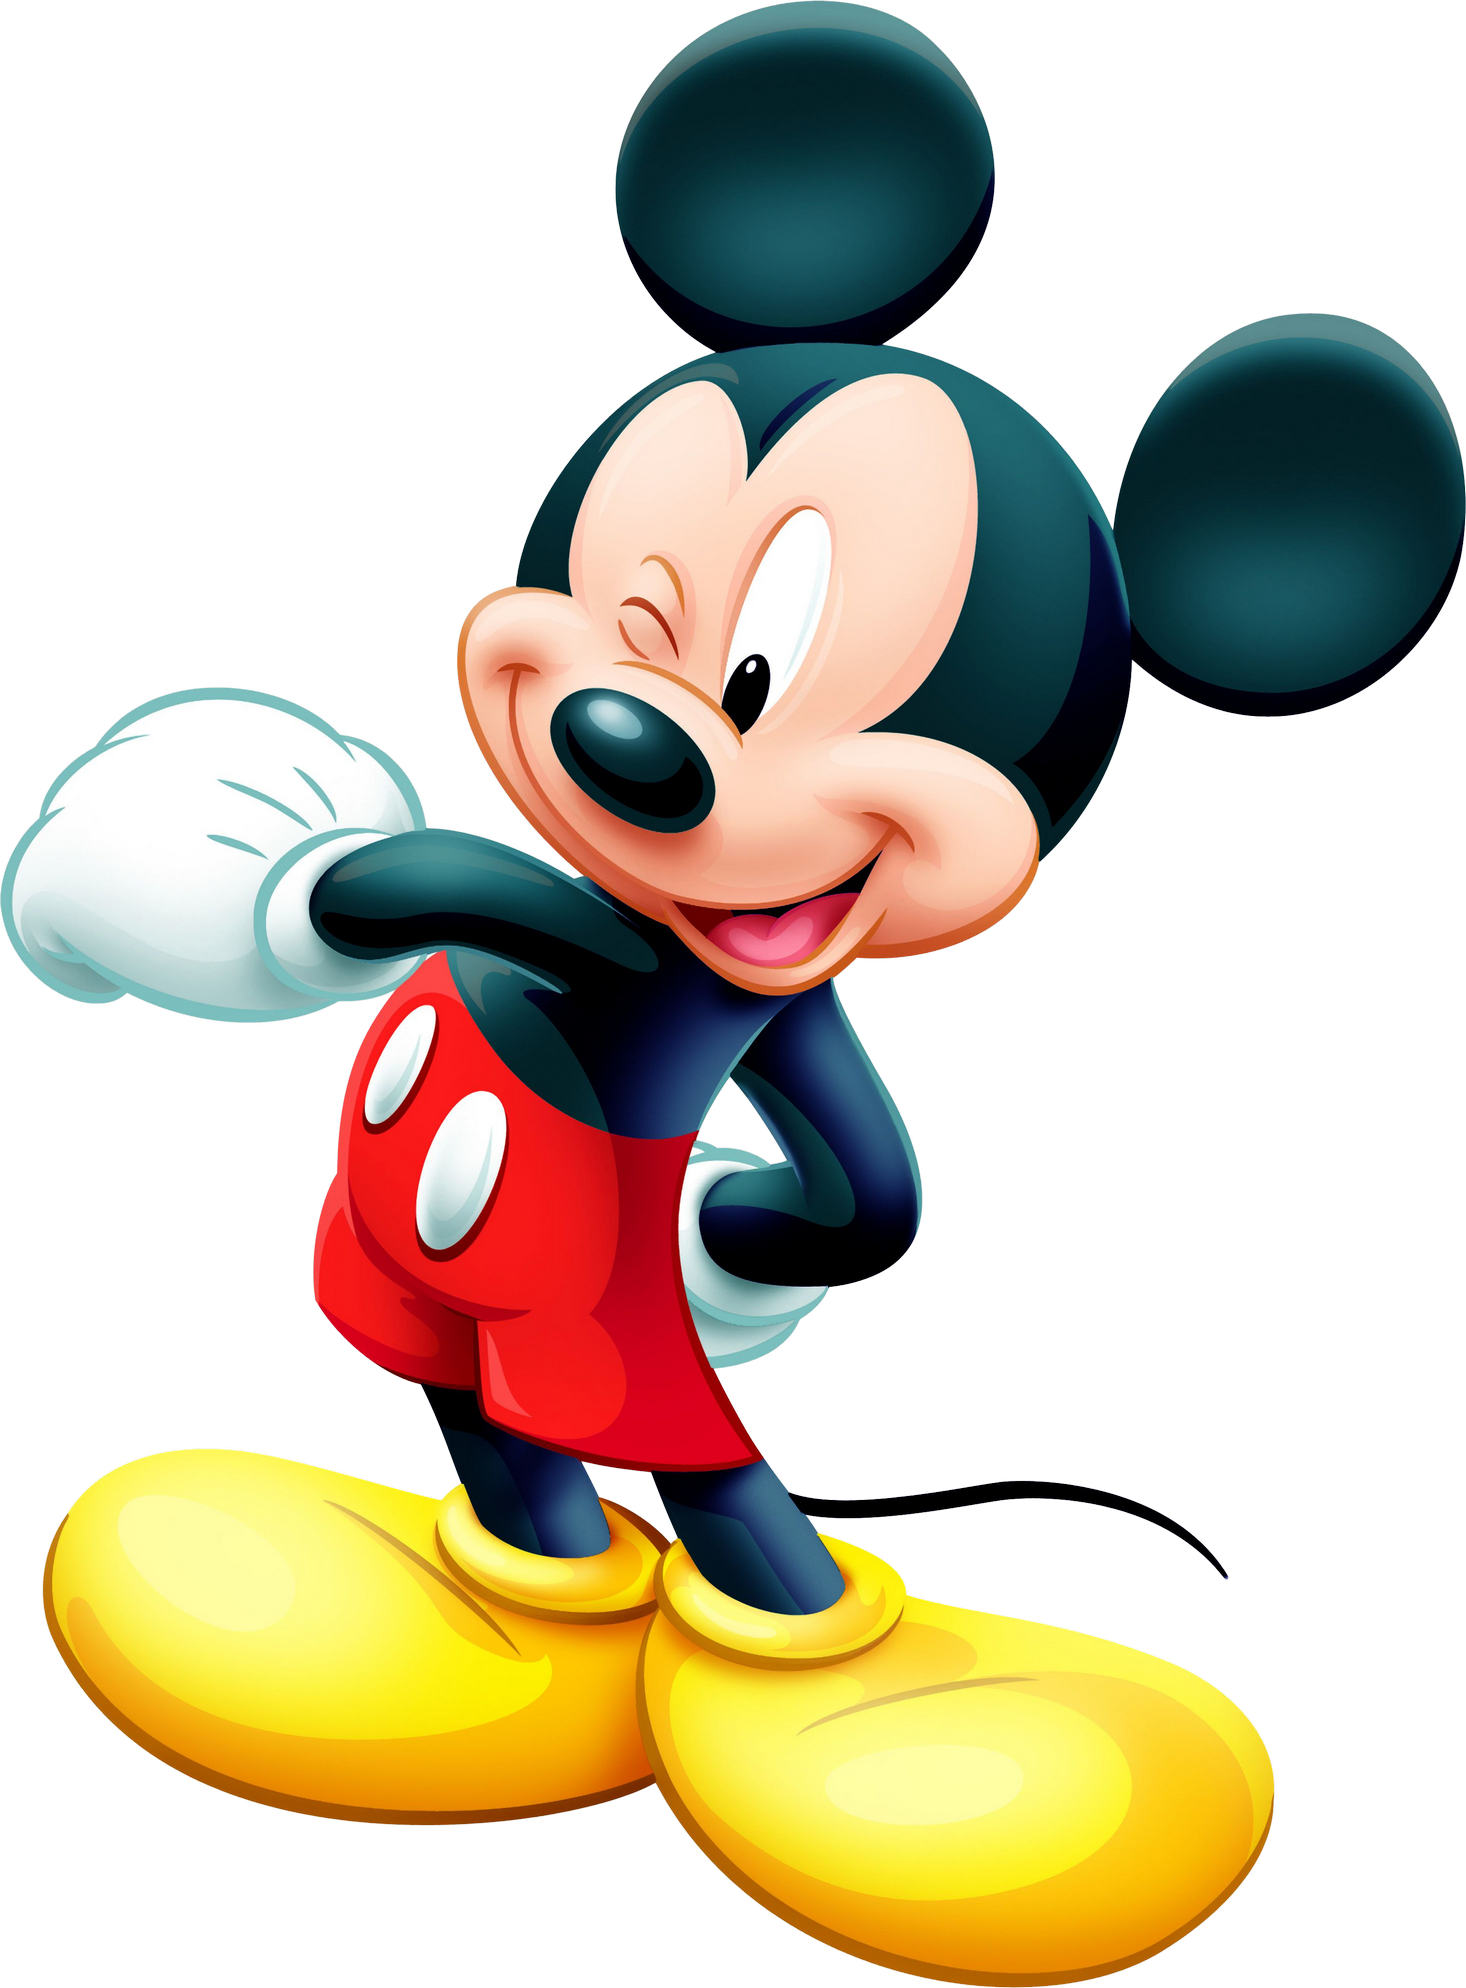 Mickey Mouse PNG Image.